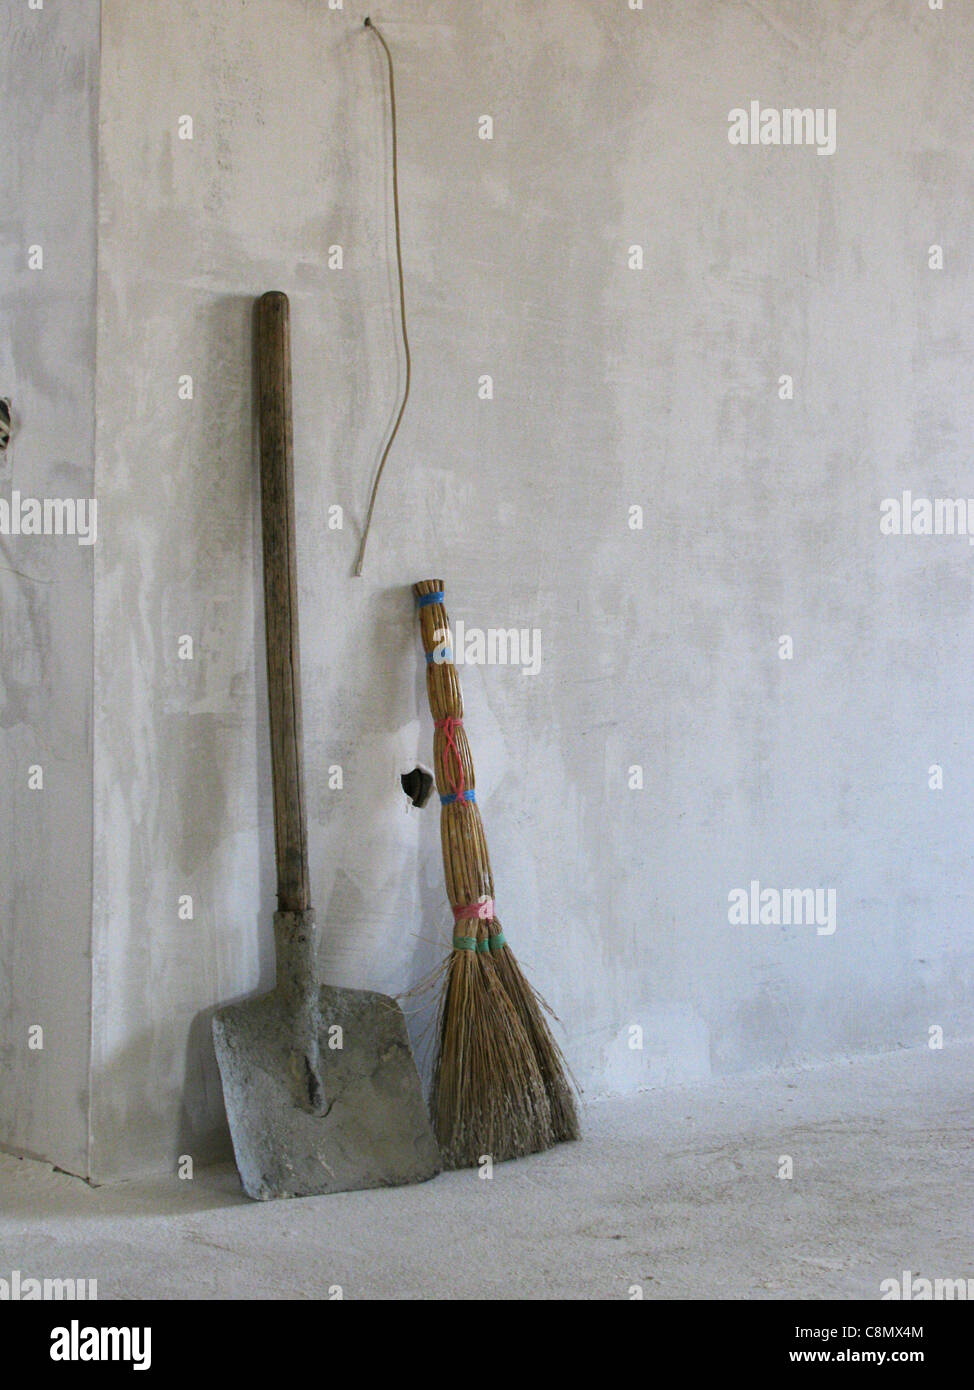 broom and shovel in a room being under construction Stock Photo